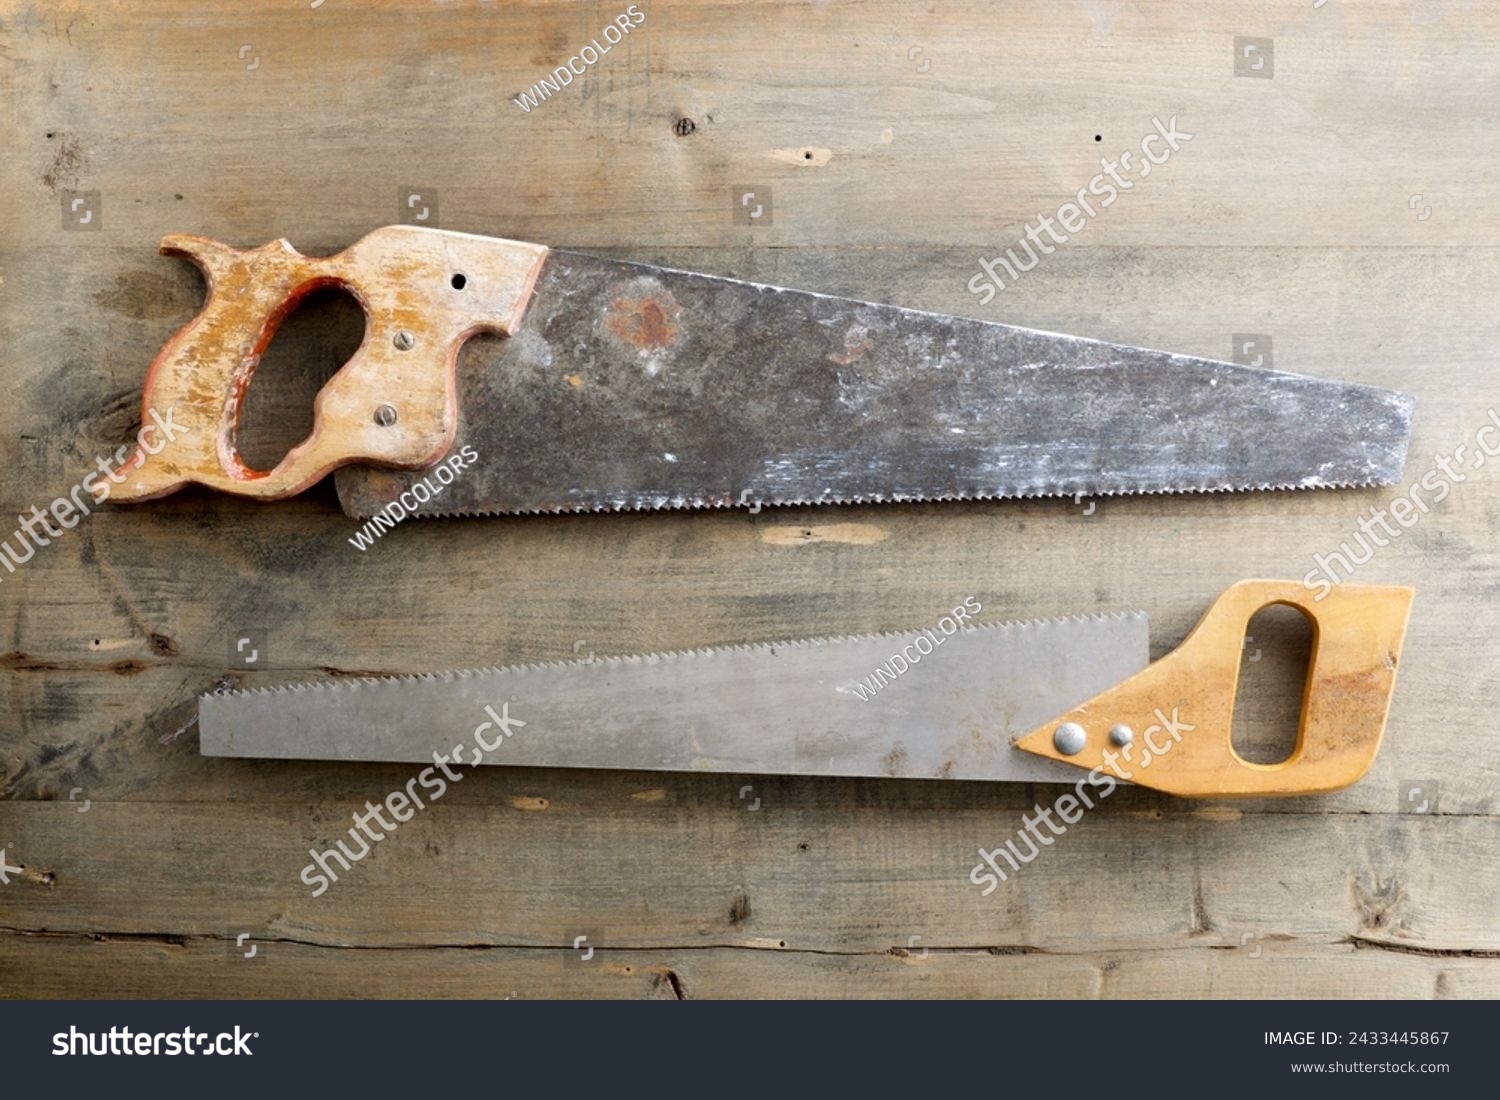 Close up of two disused handsaws on a work bench. #2433445867